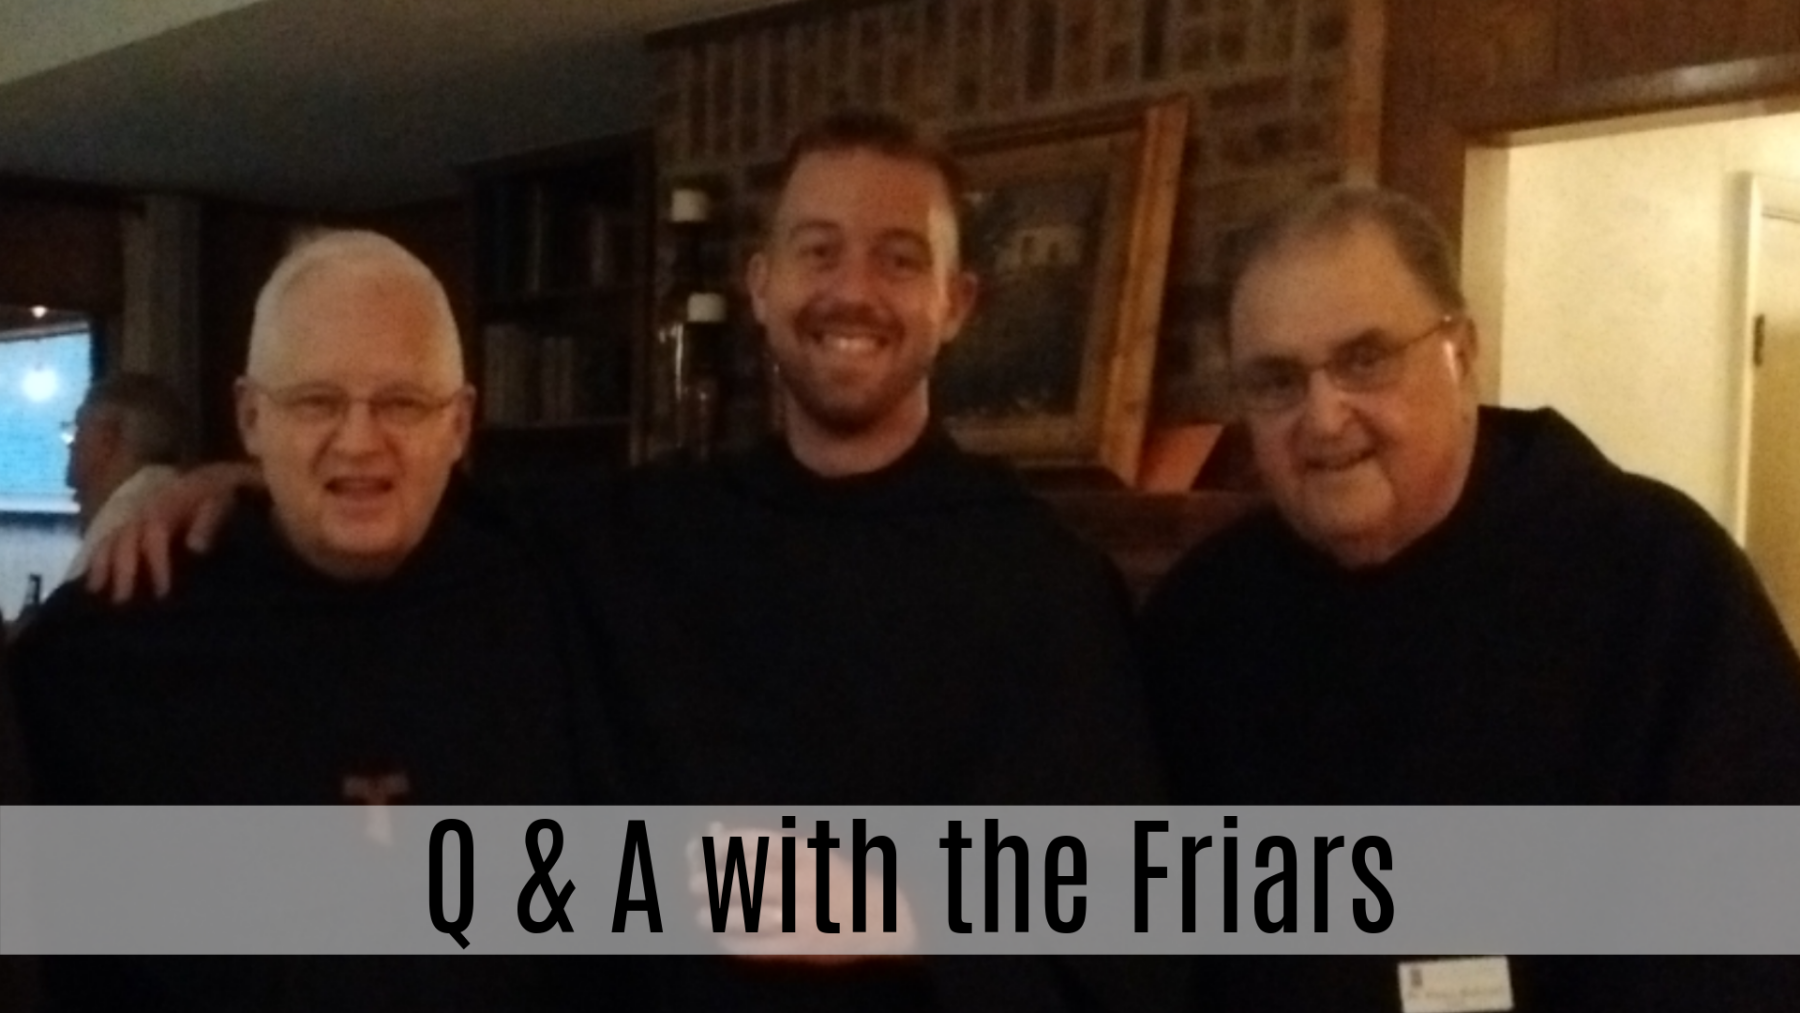 Q & A with the Friars